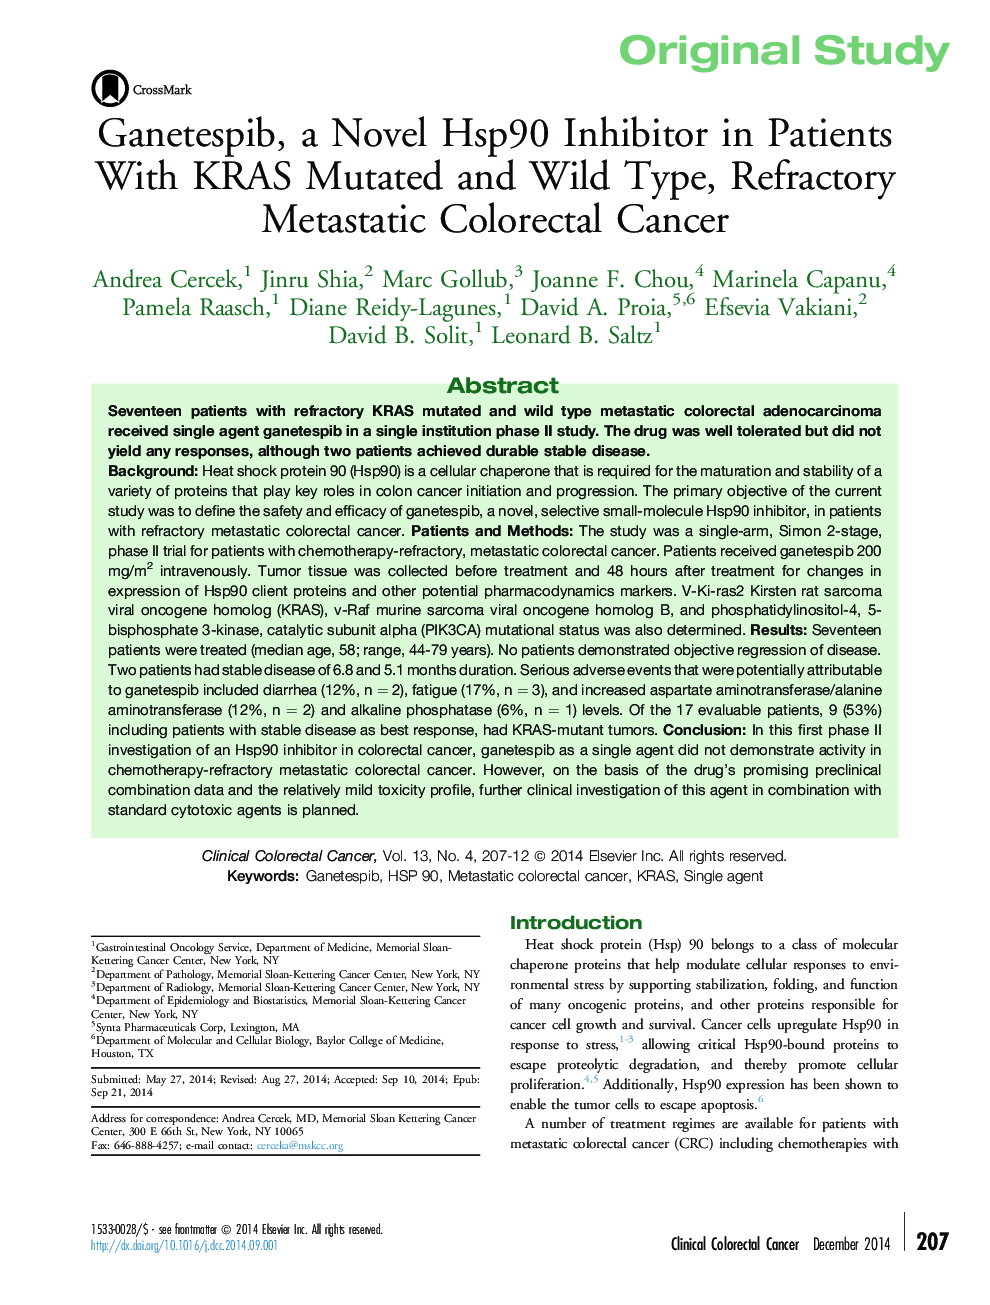 Ganetespib, a Novel Hsp90 Inhibitor in Patients With KRAS Mutated and Wild Type, Refractory Metastatic Colorectal Cancer